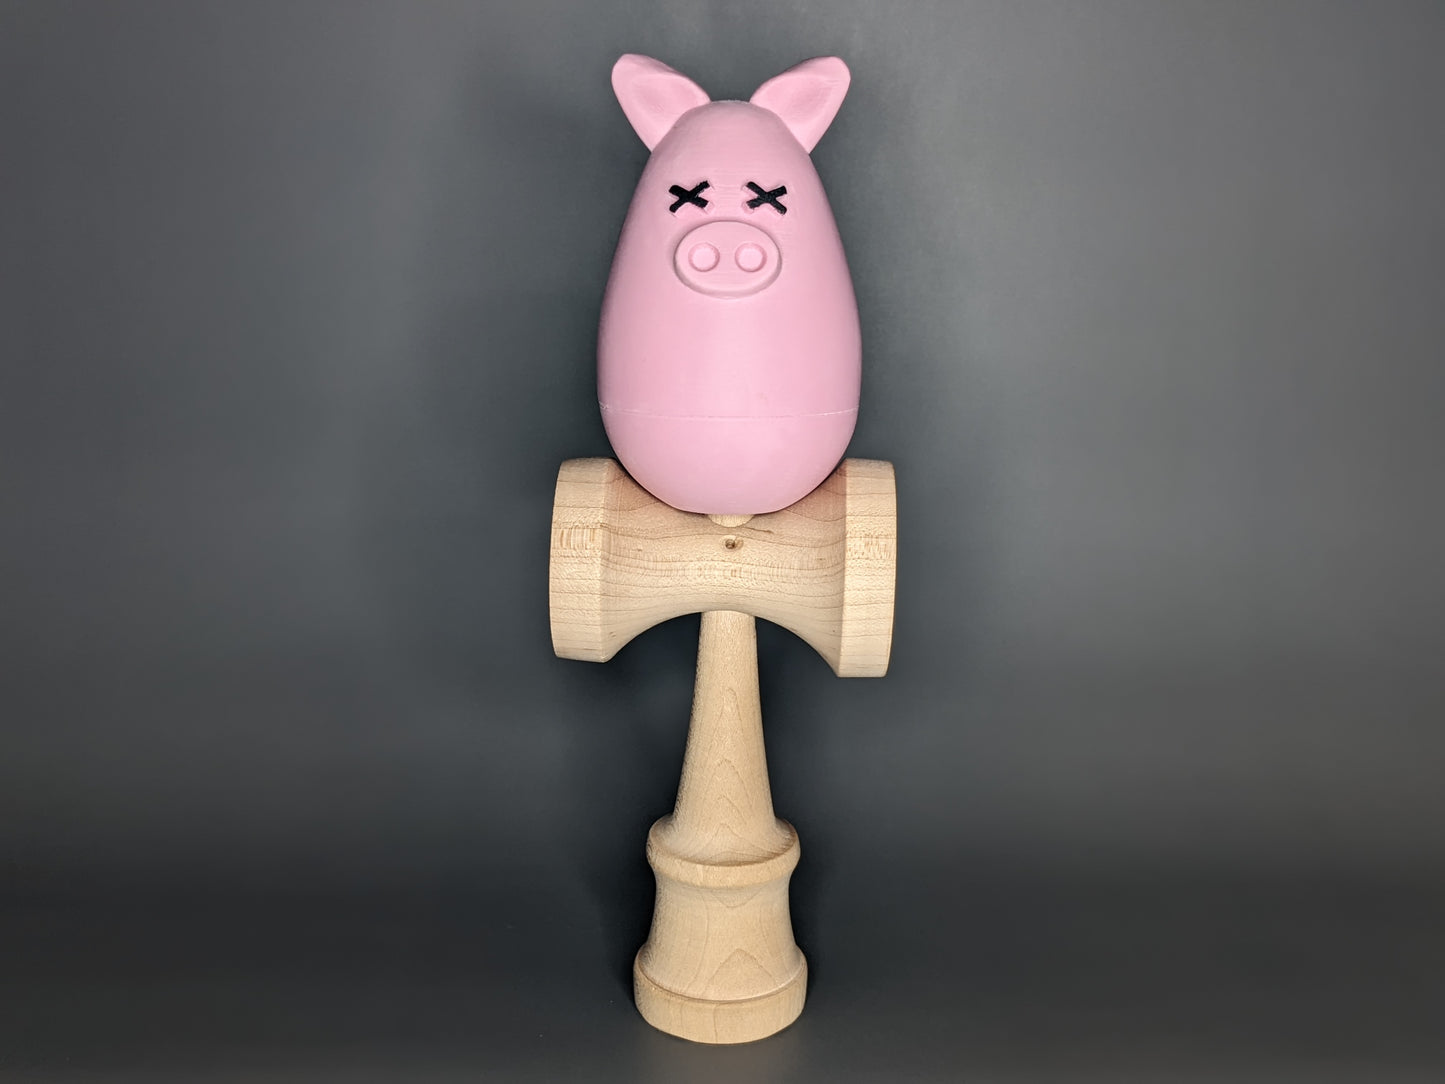 Pink 3D Printed Tama in an egg-like shape with ears, a pig snout and black x's for eyes (Kalua the Peeg). The 3d printed tama sits on a wooden Ken for a Kendama.